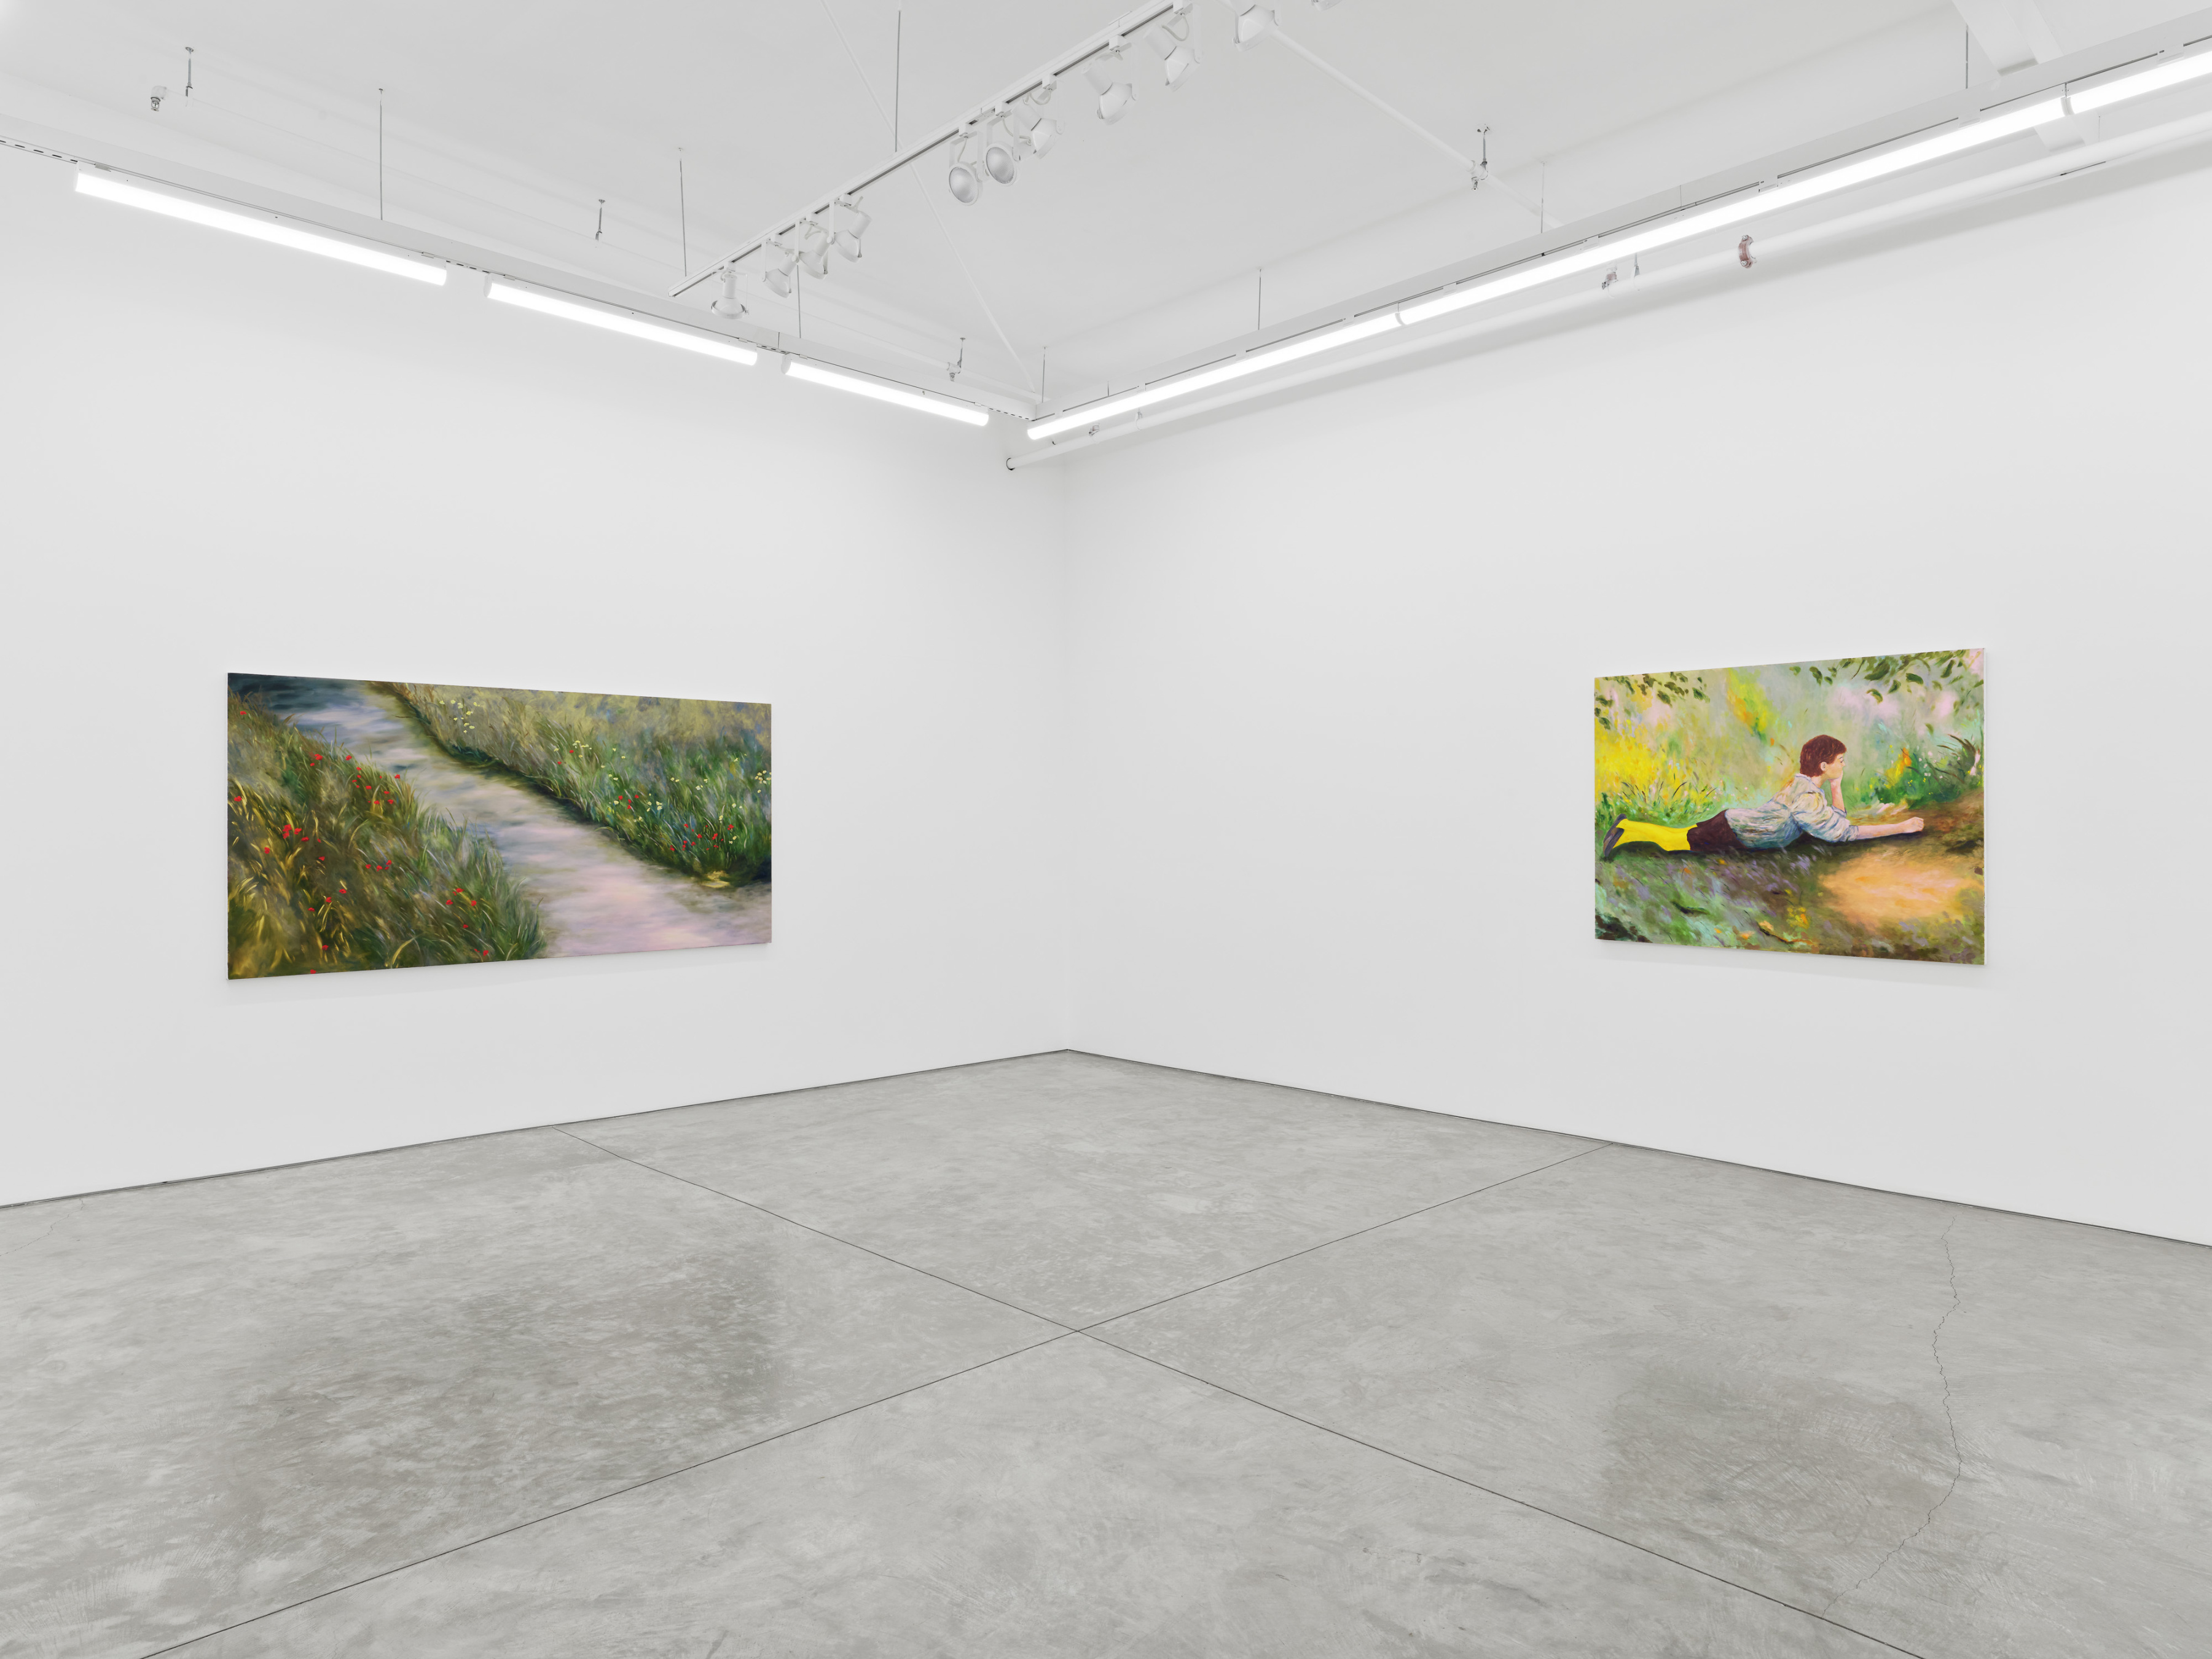 Installation view of Coco Young's "Passage" at Night Gallery.